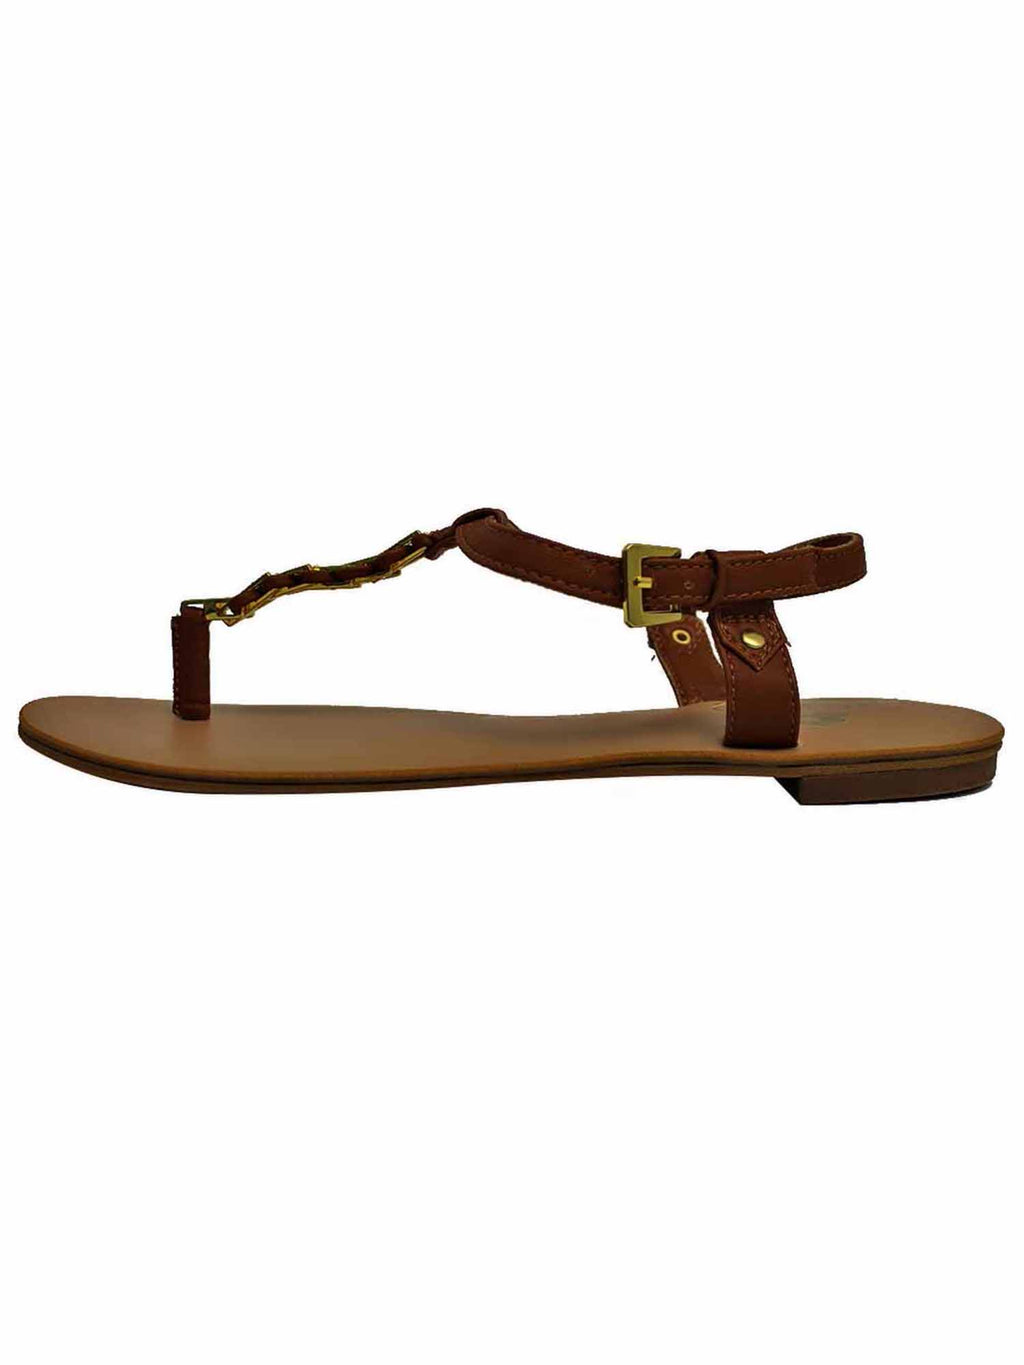 Womens Thong Sandal With Gold Braid Strap